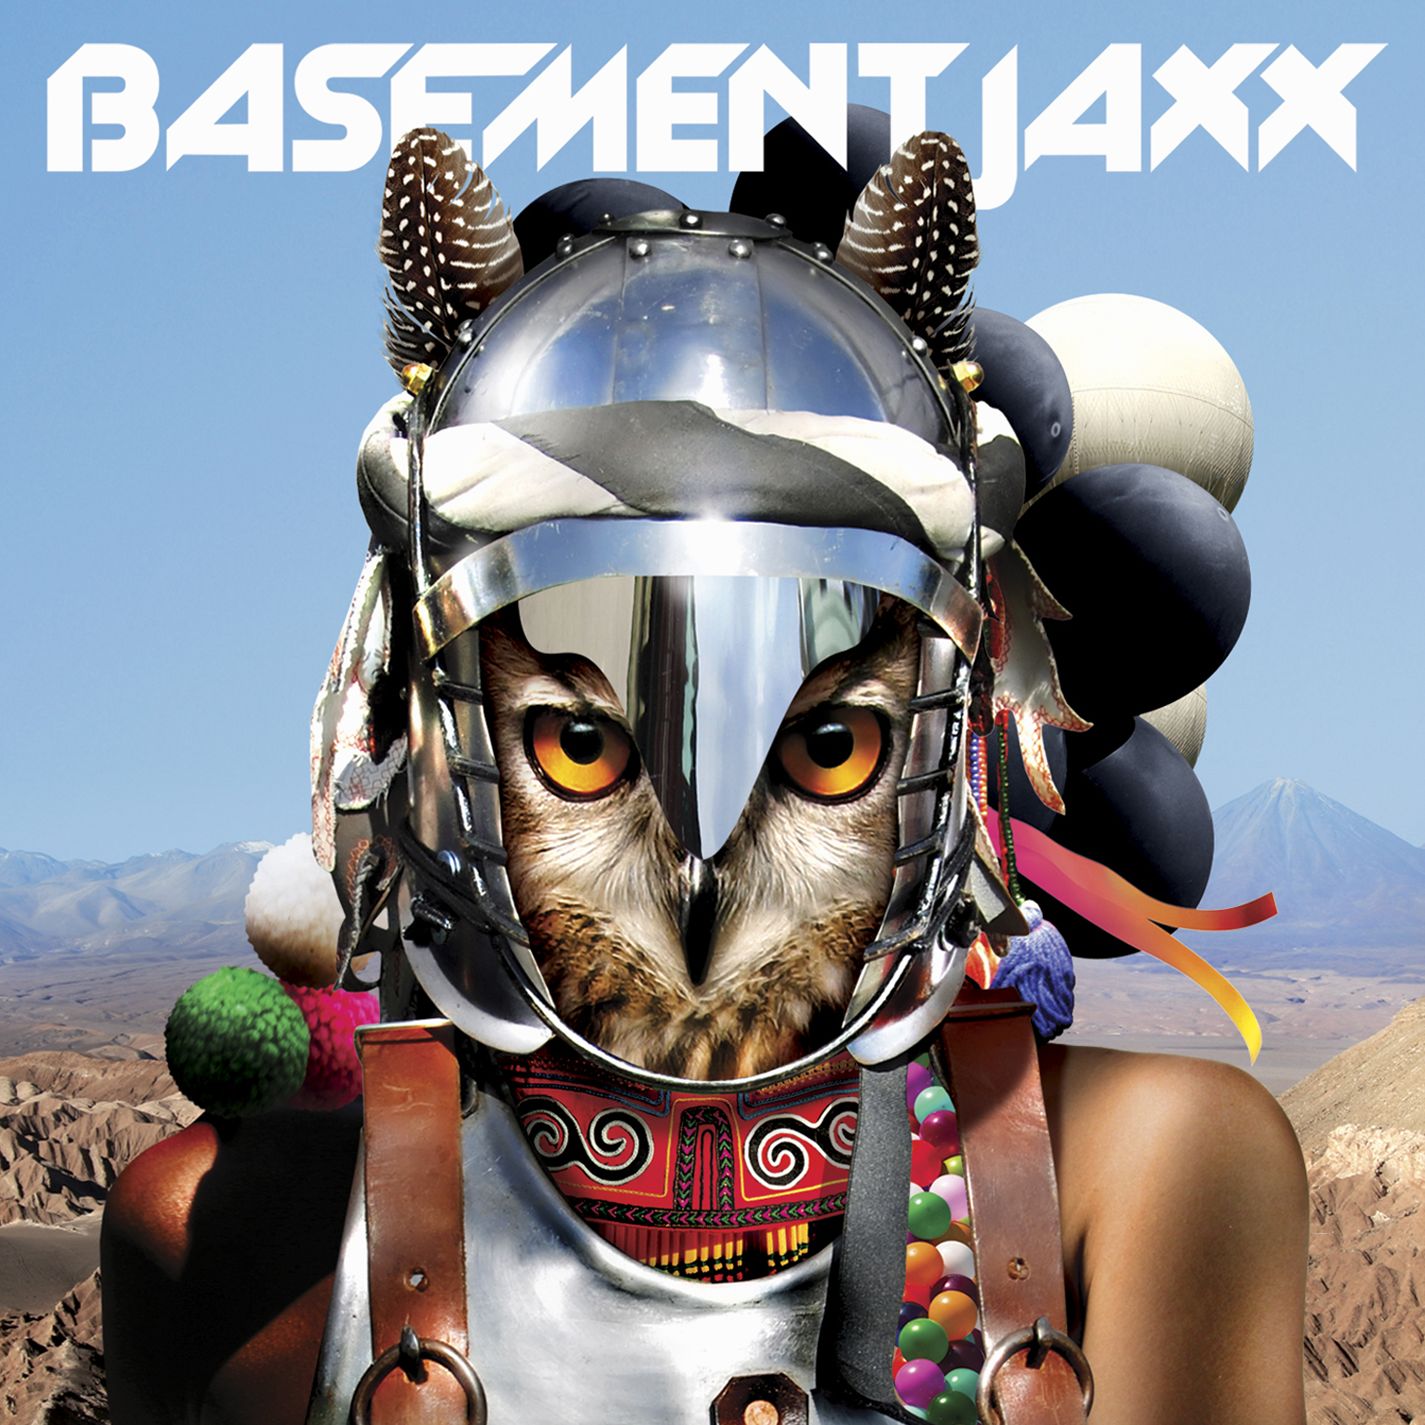 WELCOME TO DIRTY SMART’S BLOG. : BASEMENT JAXX'S ORCHESTRAL ALBUM...